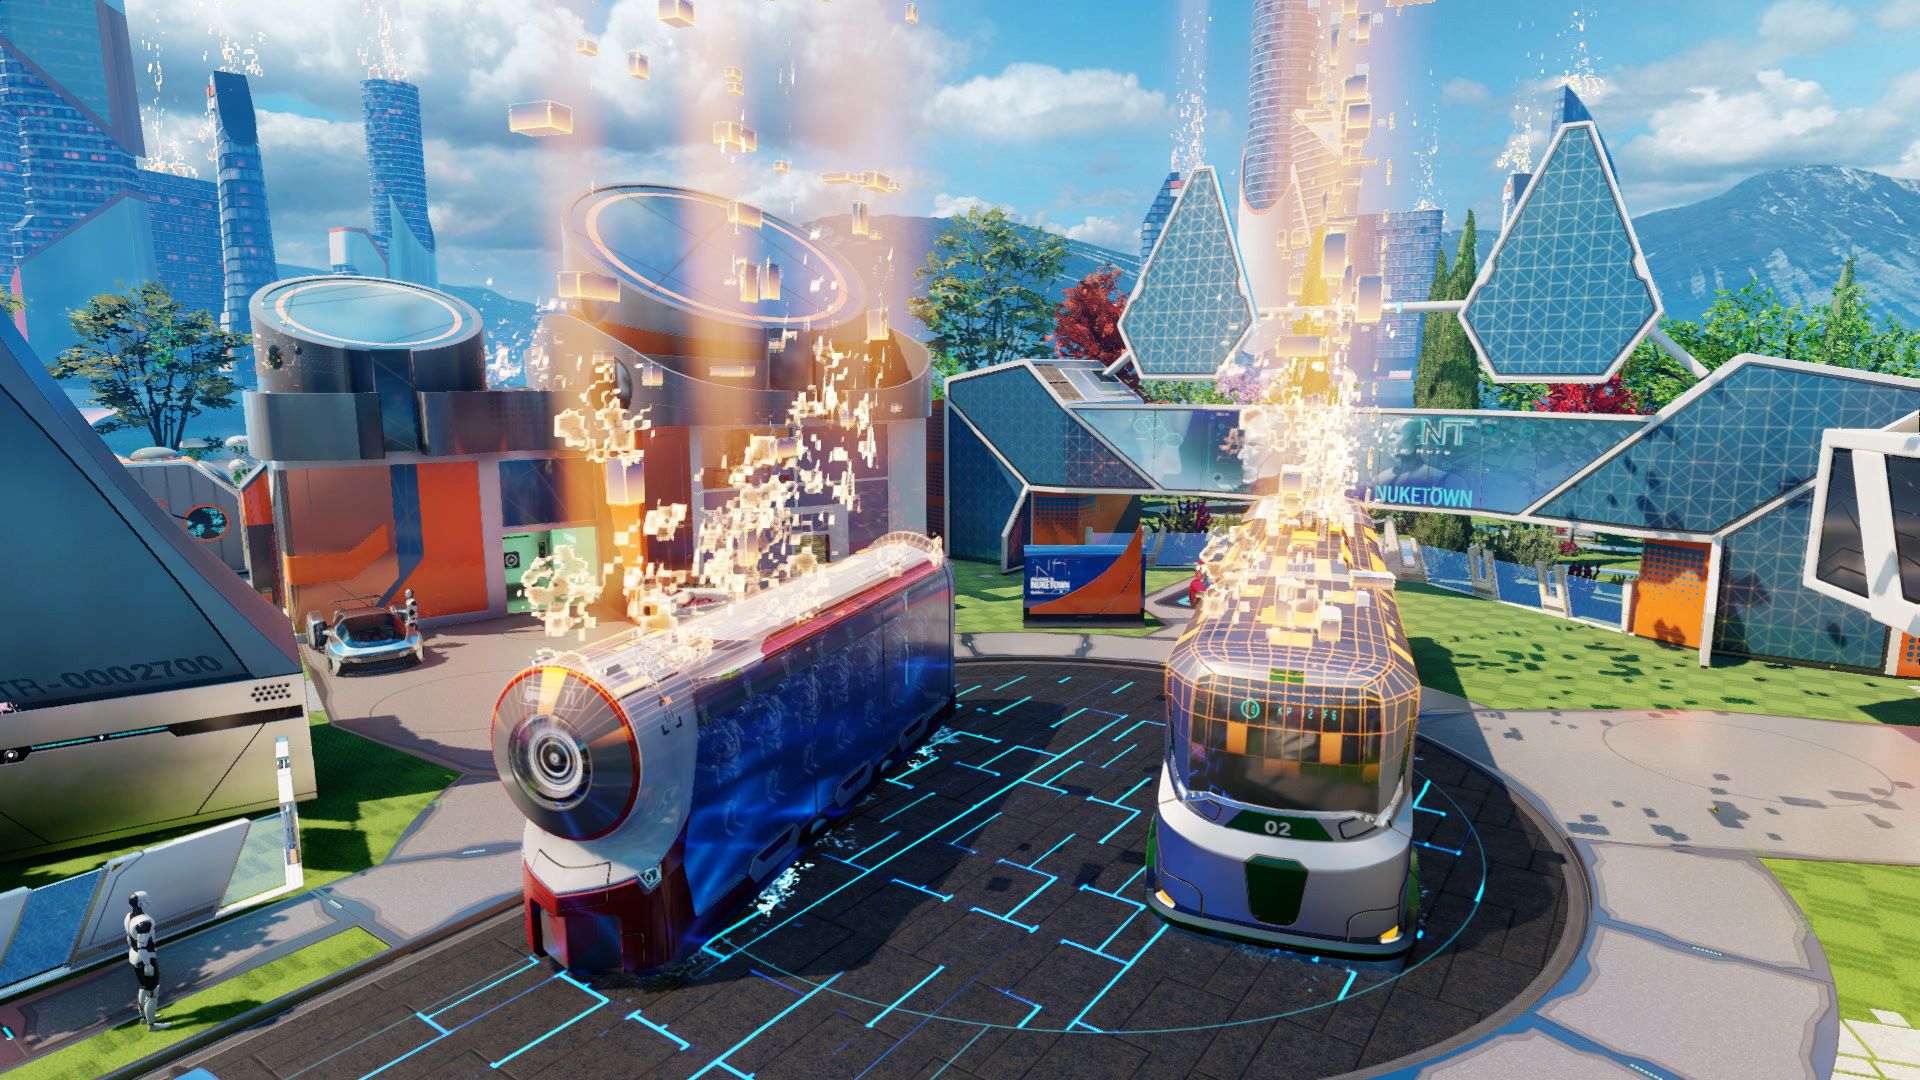 nuketown from call of duty black ops 3